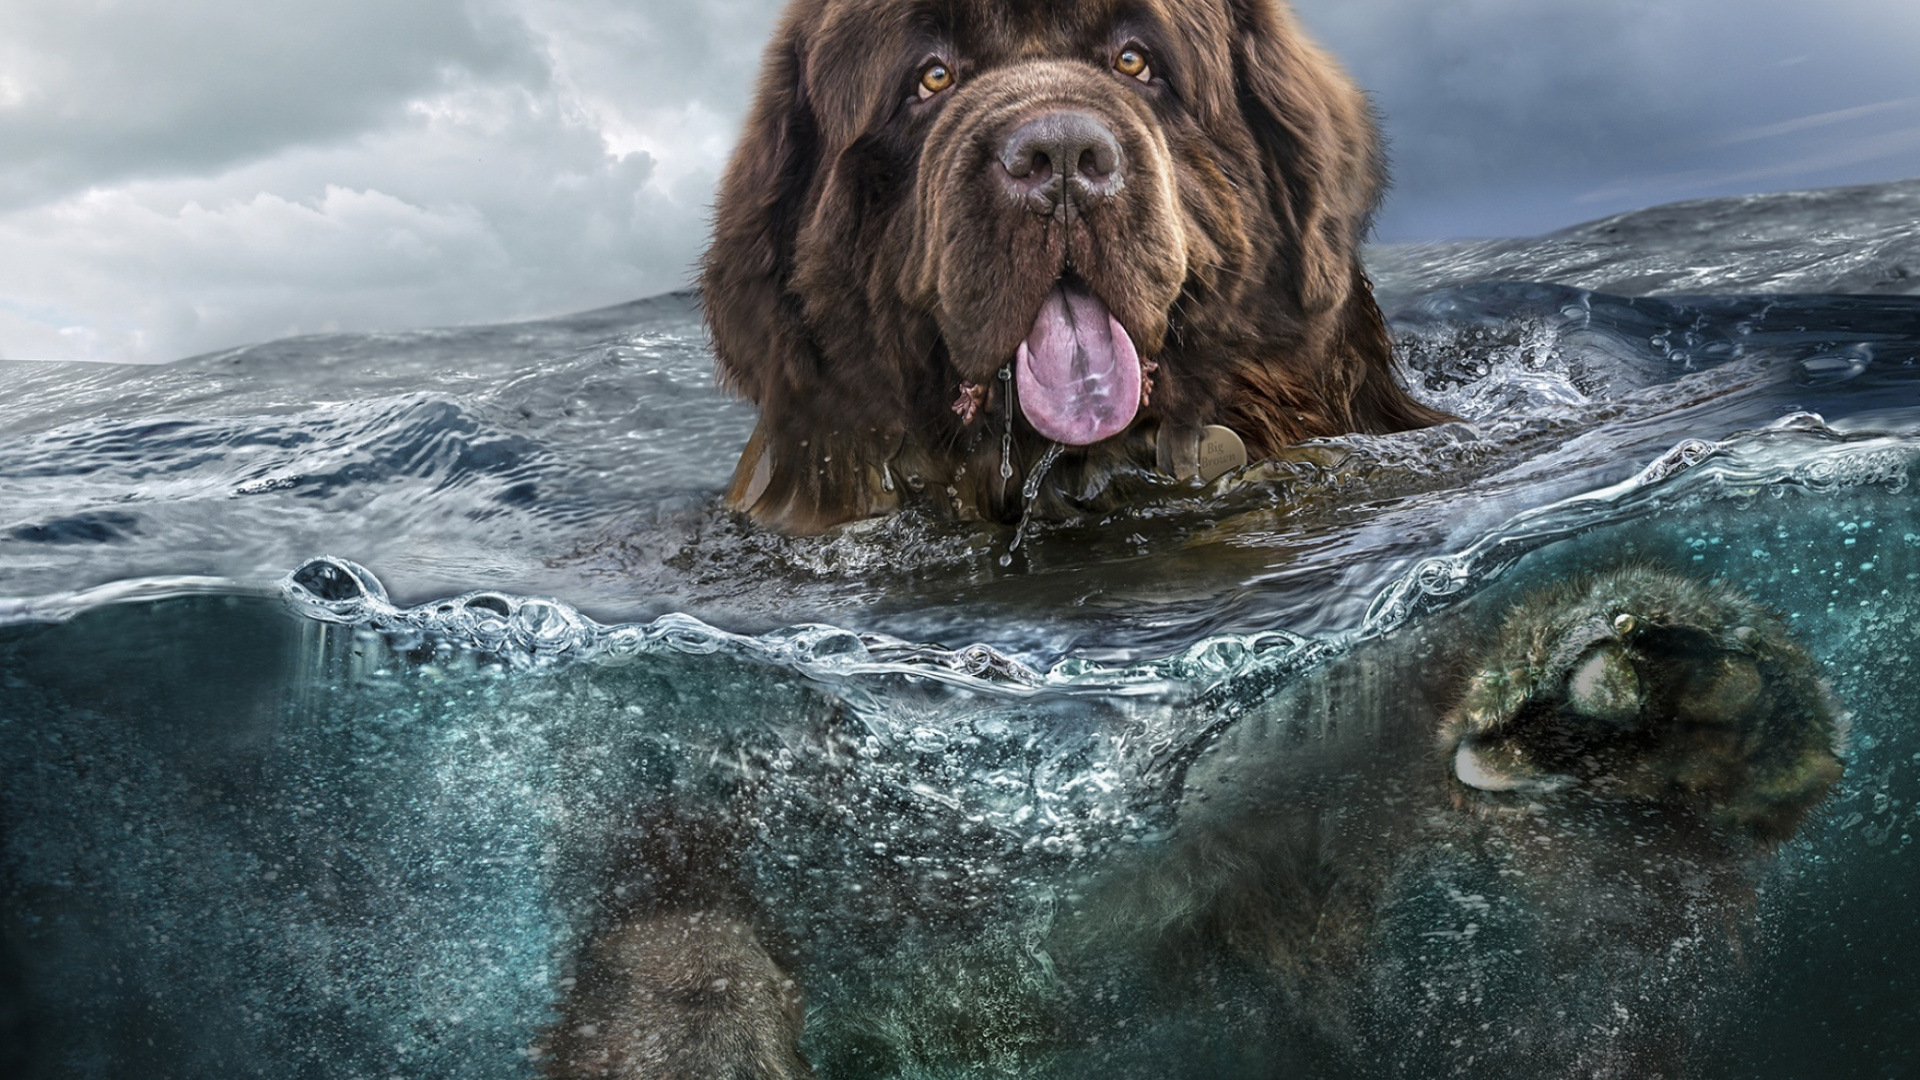 Brown Long Coated Dog in Water. Wallpaper in 1920x1080 Resolution